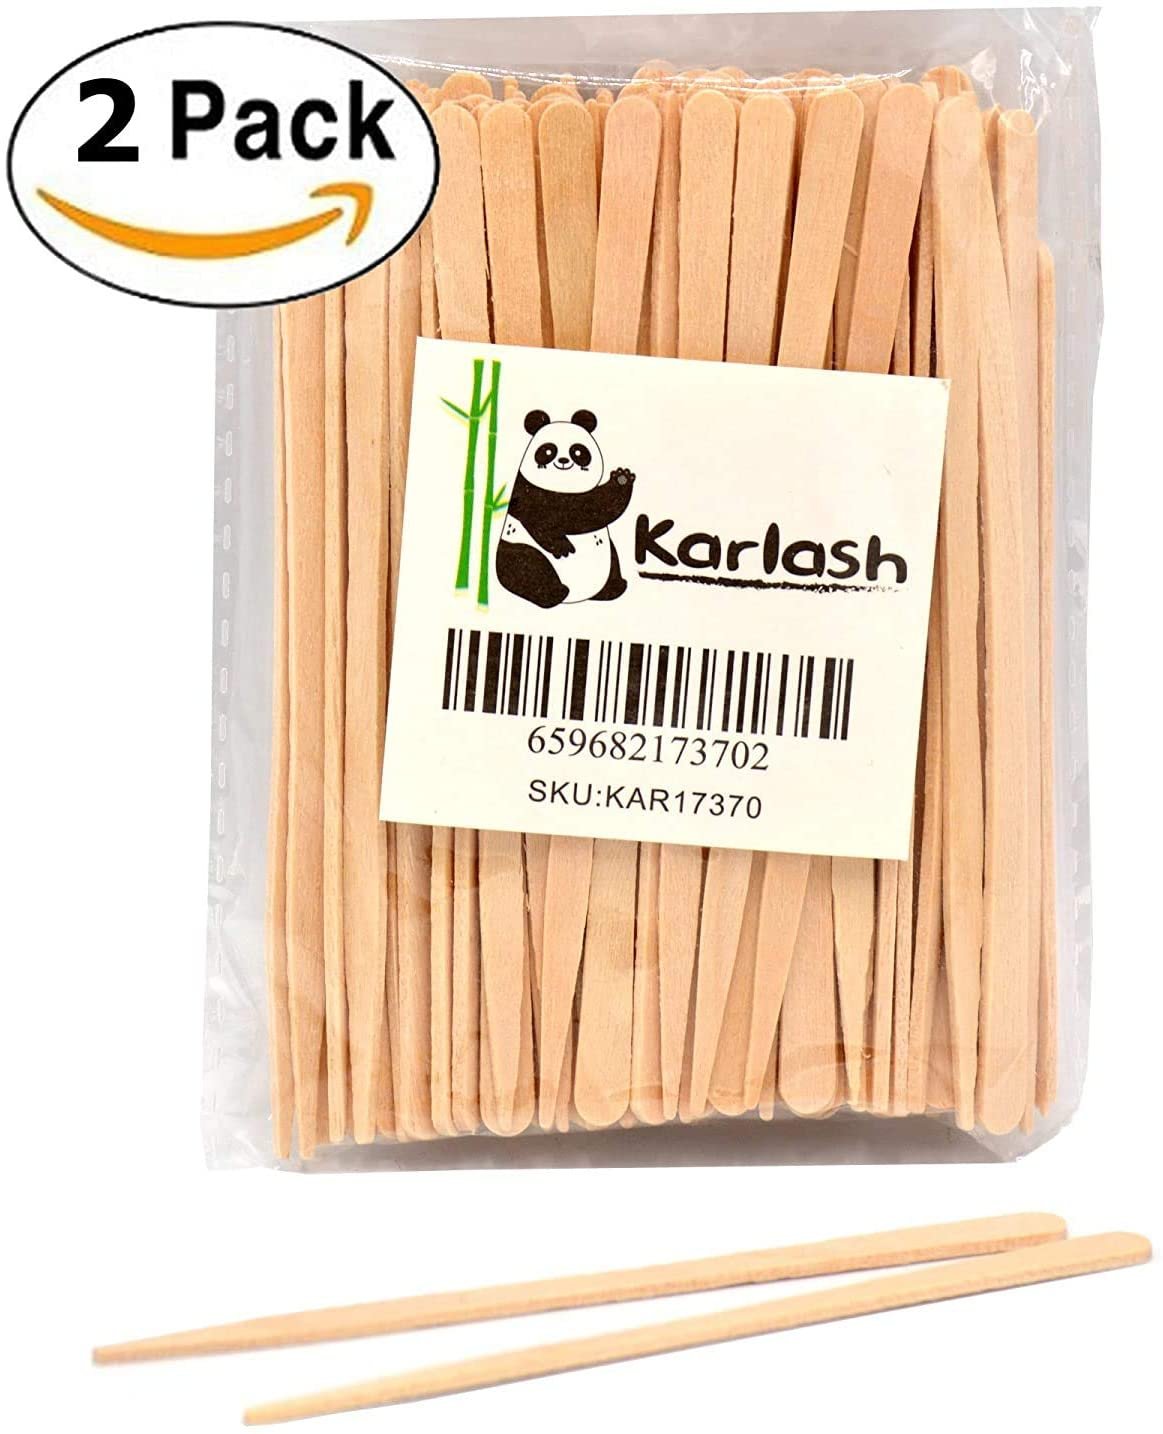 Karlash Small Wax Sticks Wood Spatulas Applicator Craft Sticks for Hair Eyebrow Removal (Pack of 200)